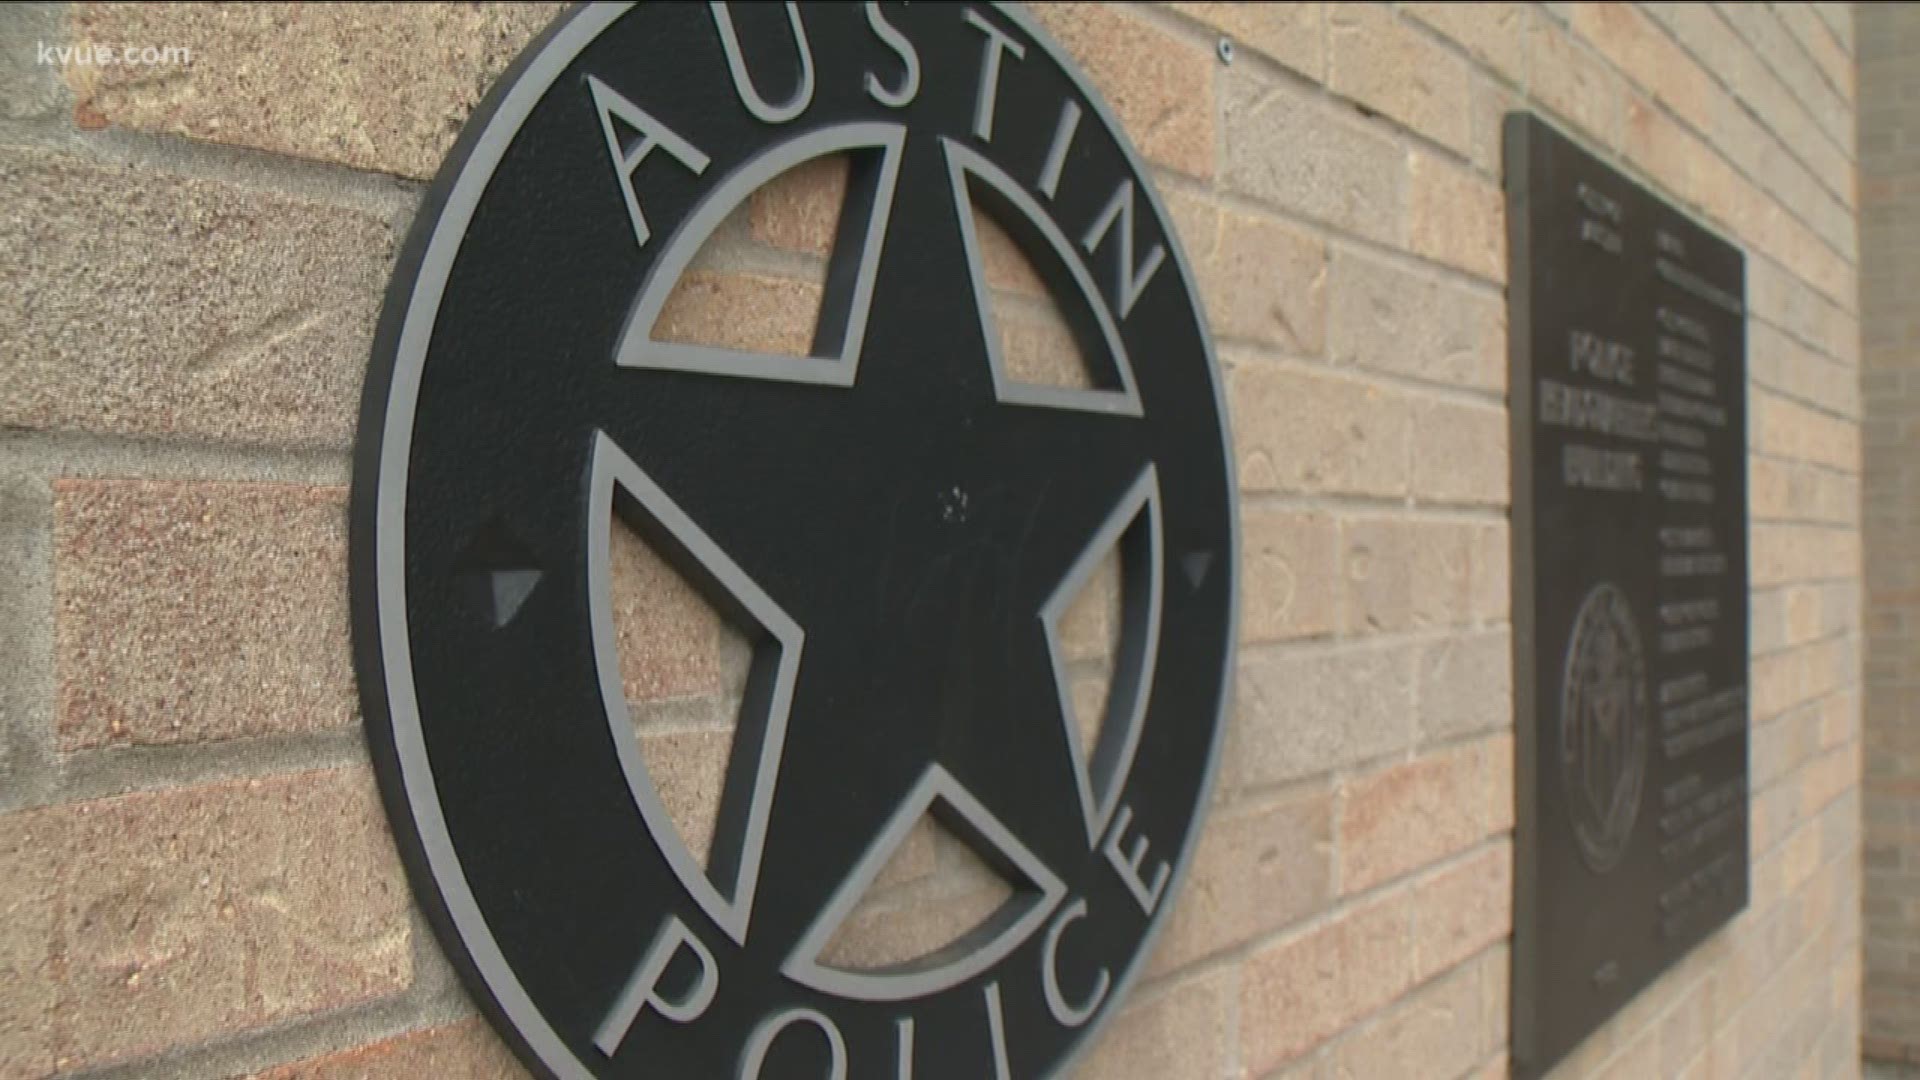 The Austin Police Department will begin training members this month after criticism regarding its handling of sexual assault cases.